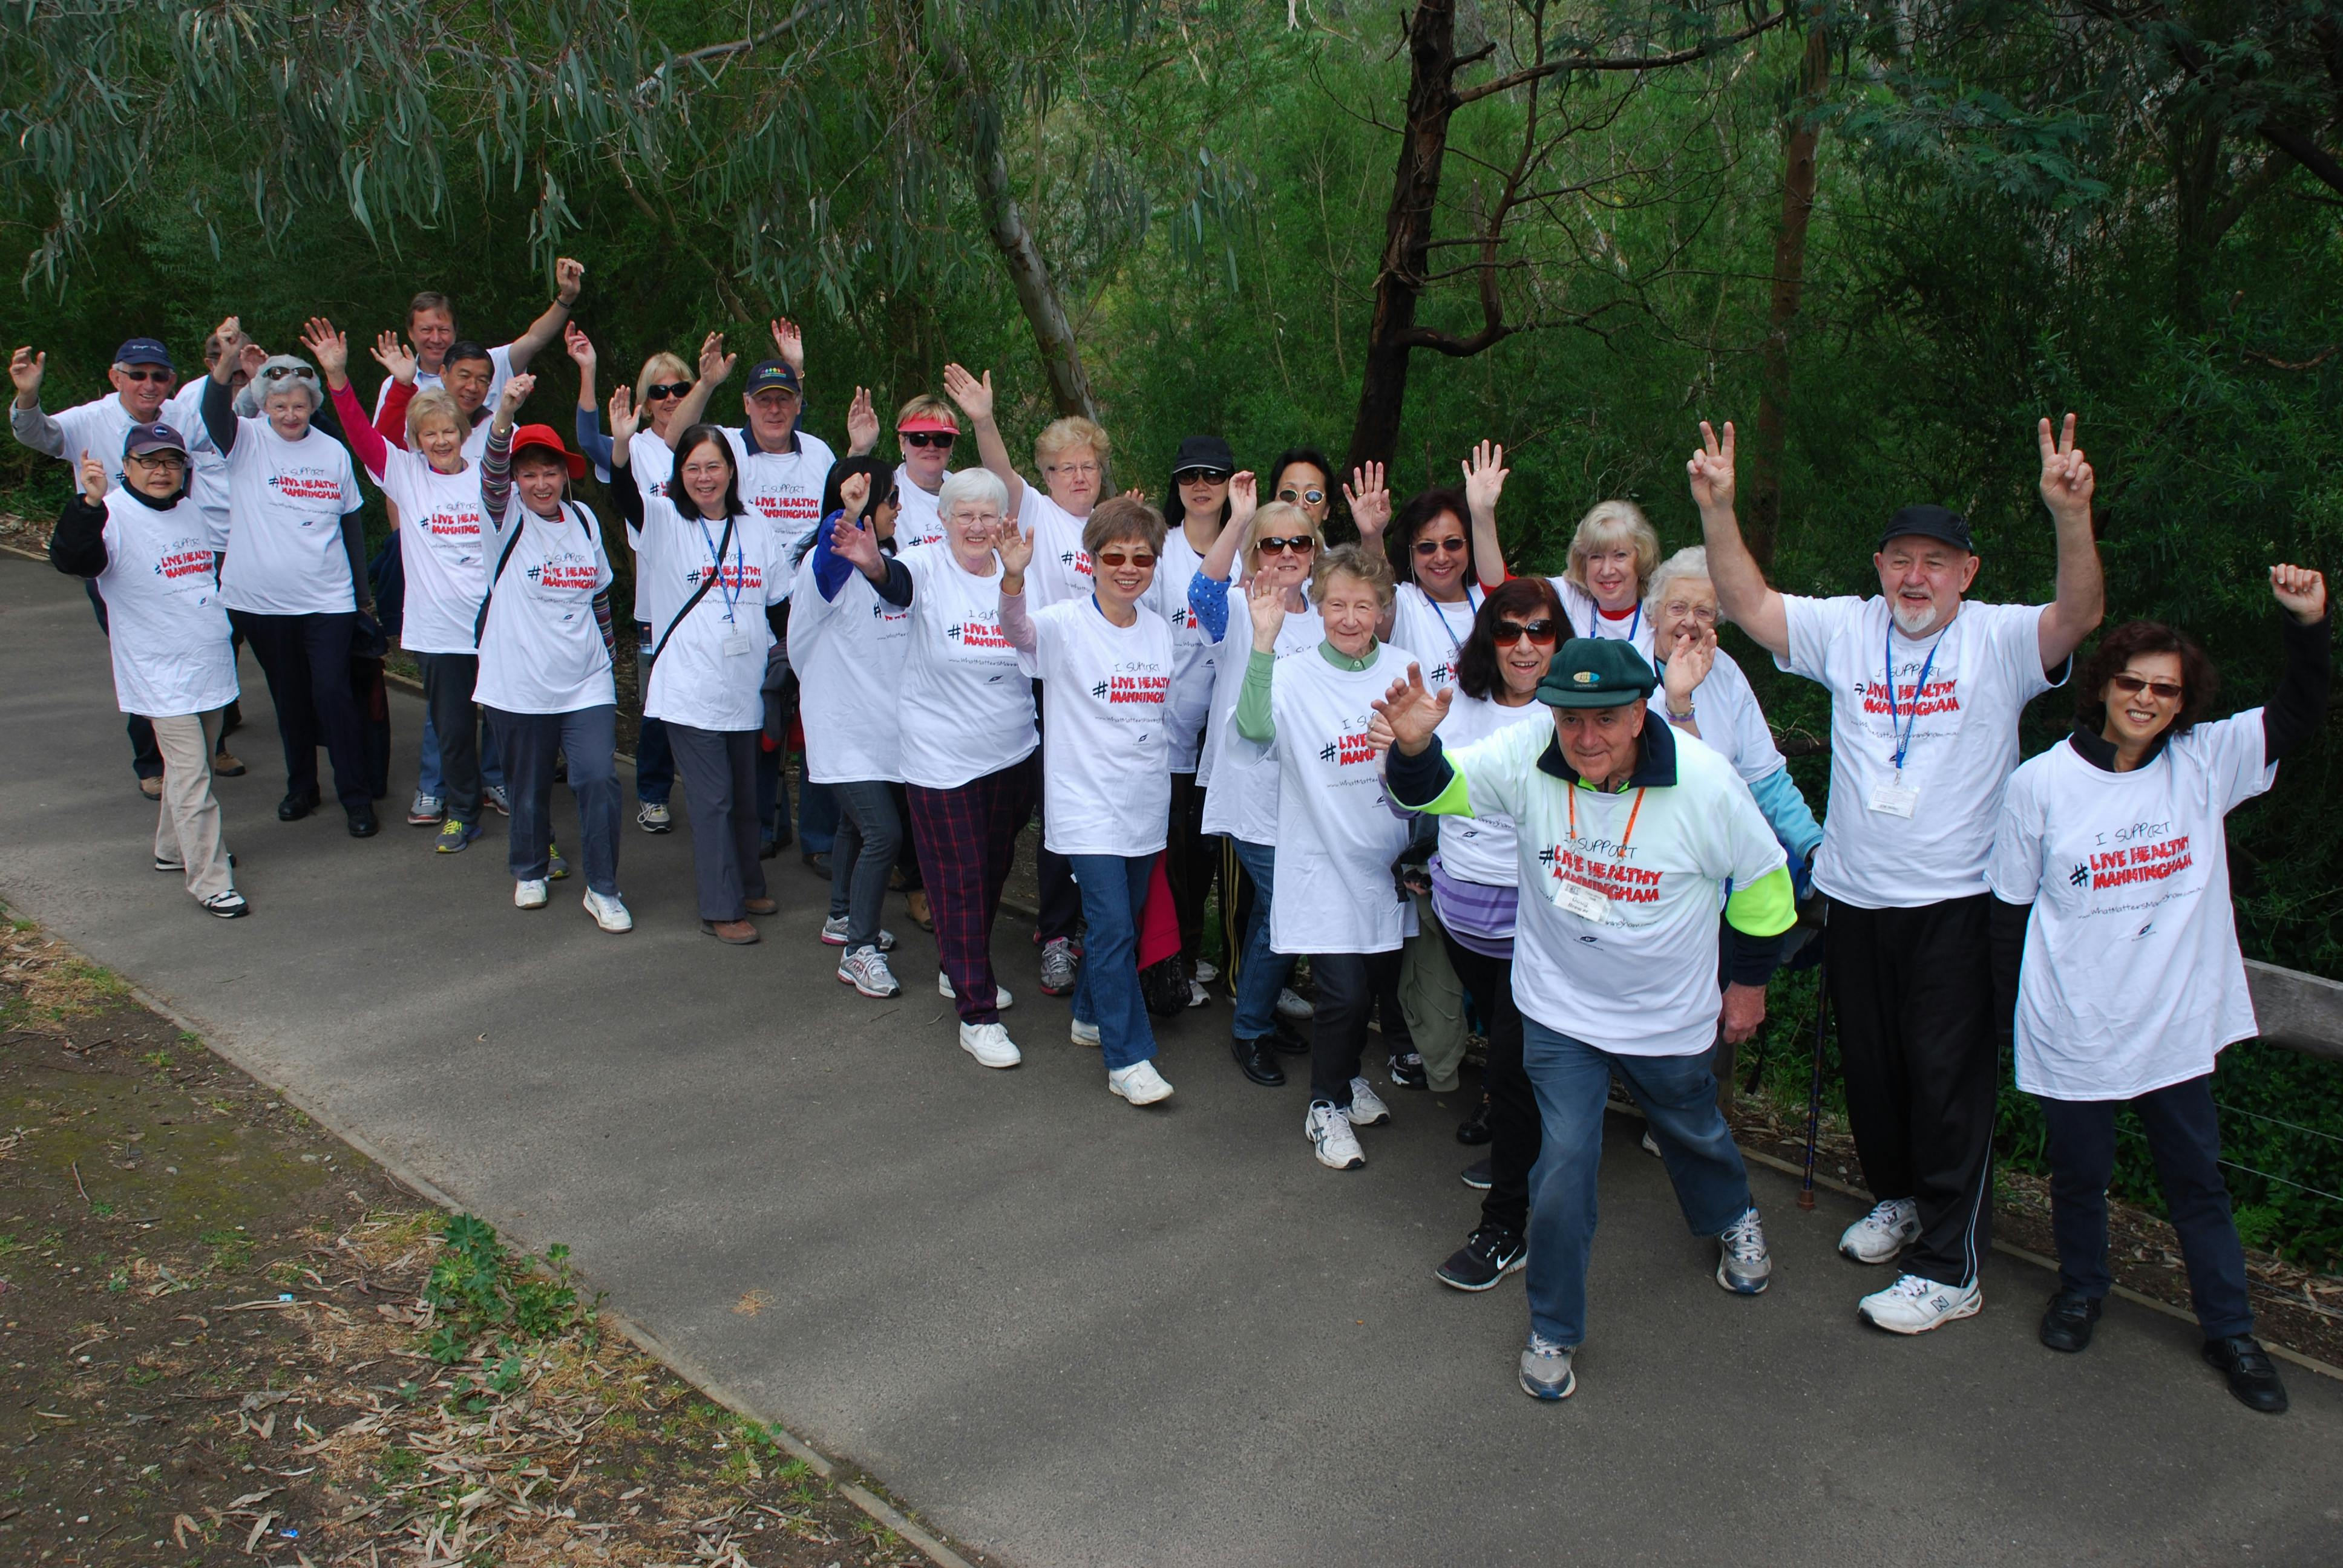 The Manningham U3A Walking Group show thier support for the #LiveHealthyManningham campaign.